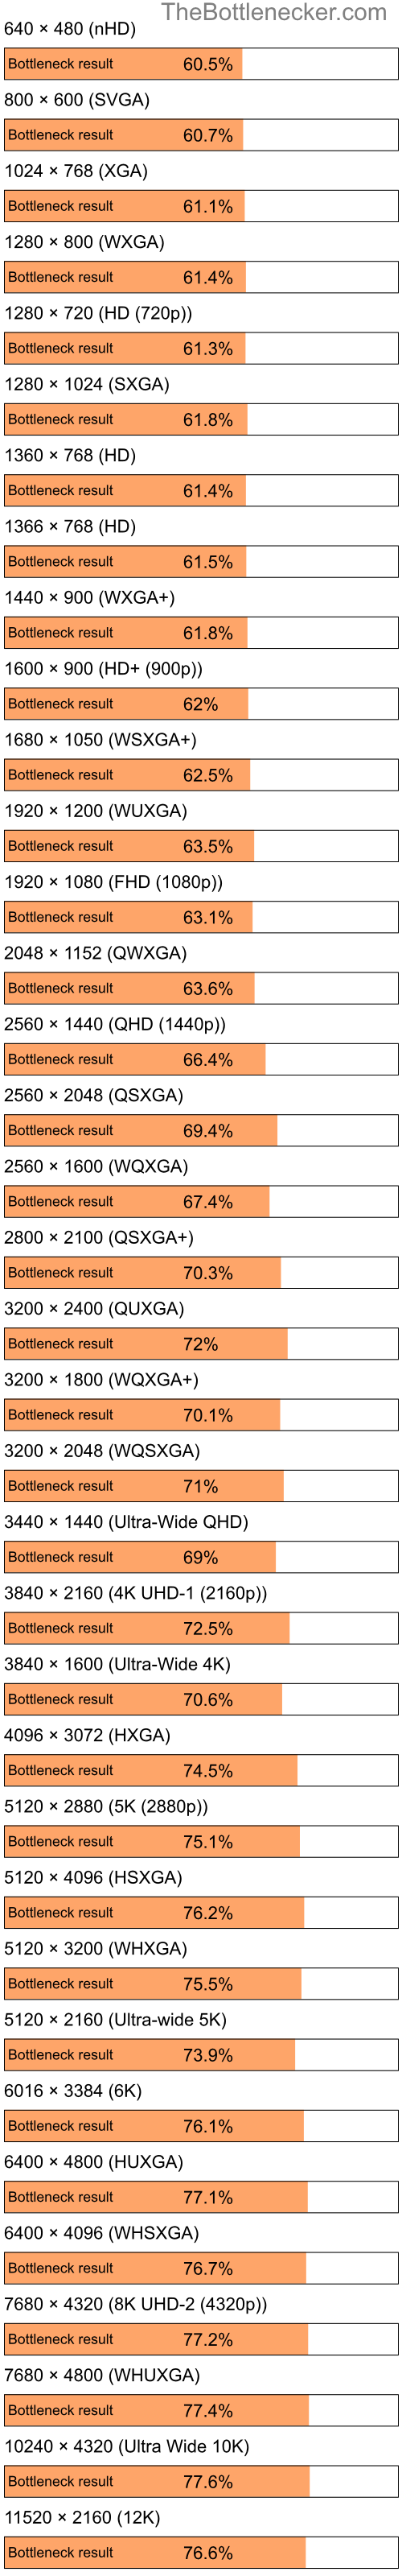 Bottleneck results by resolution for Intel Celeron and NVIDIA GeForce G210 in7 Days to Die